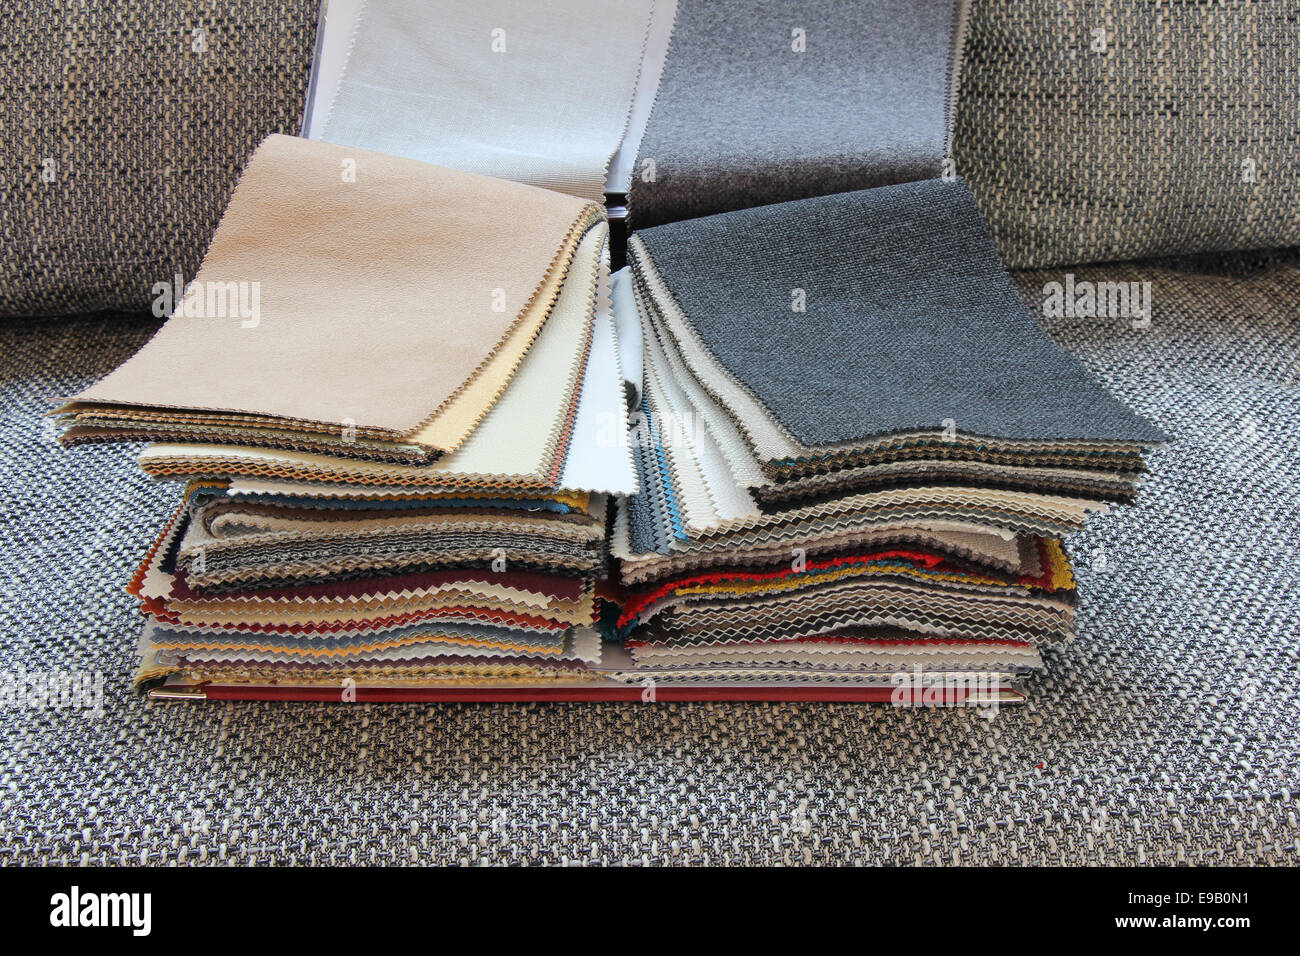 Samples of color of fabric for upholstery the furniture Stock Photo